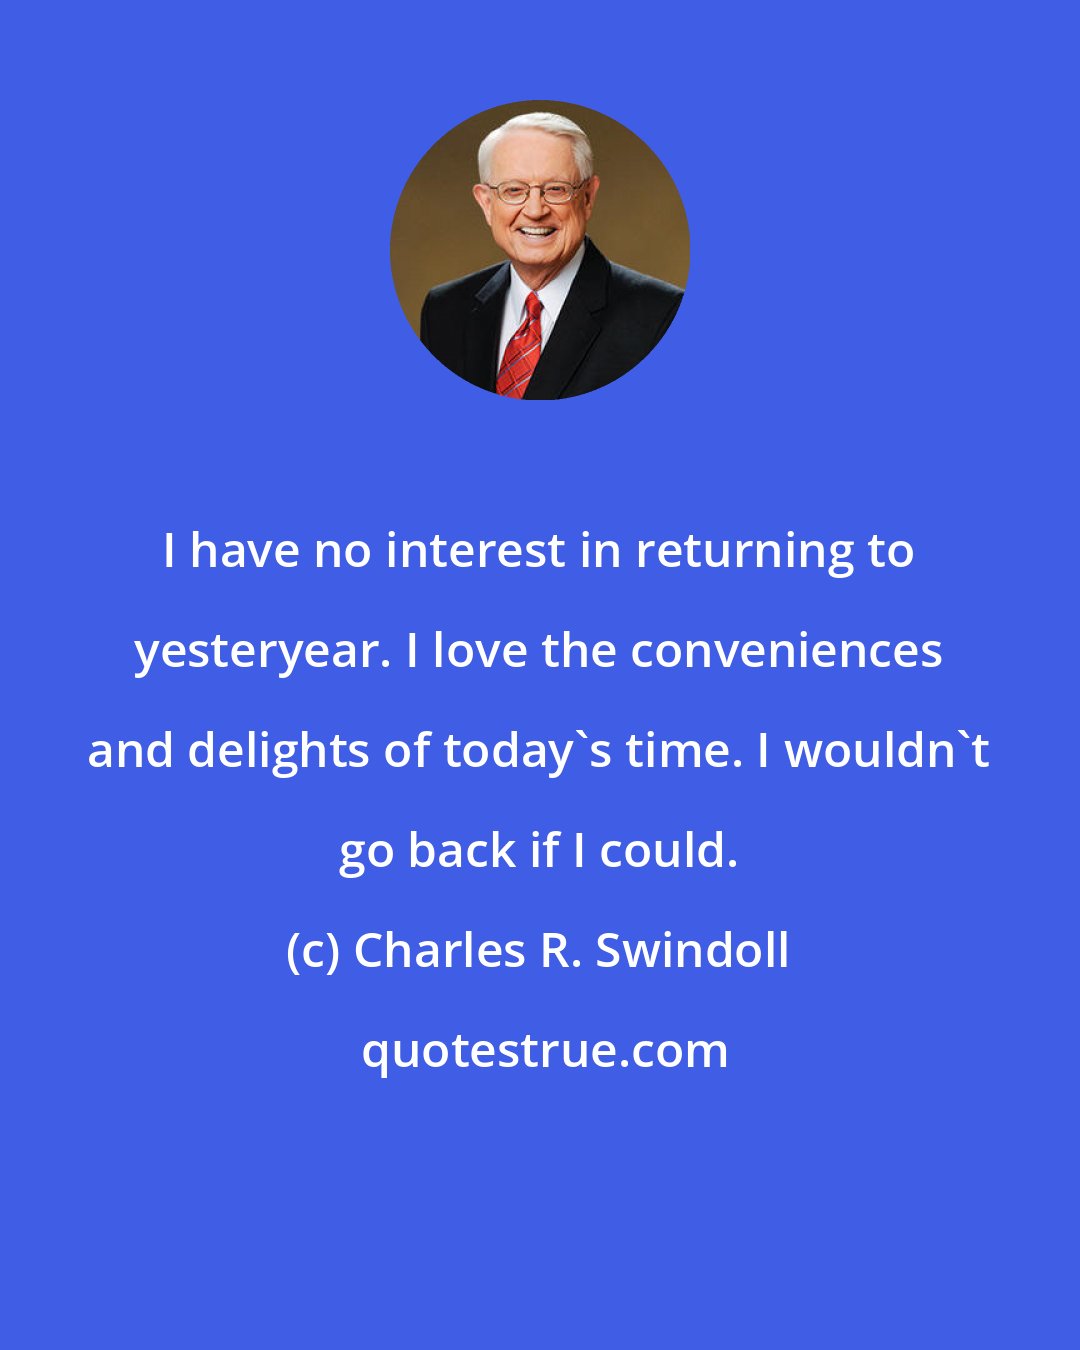 Charles R. Swindoll: I have no interest in returning to yesteryear. I love the conveniences and delights of today's time. I wouldn't go back if I could.